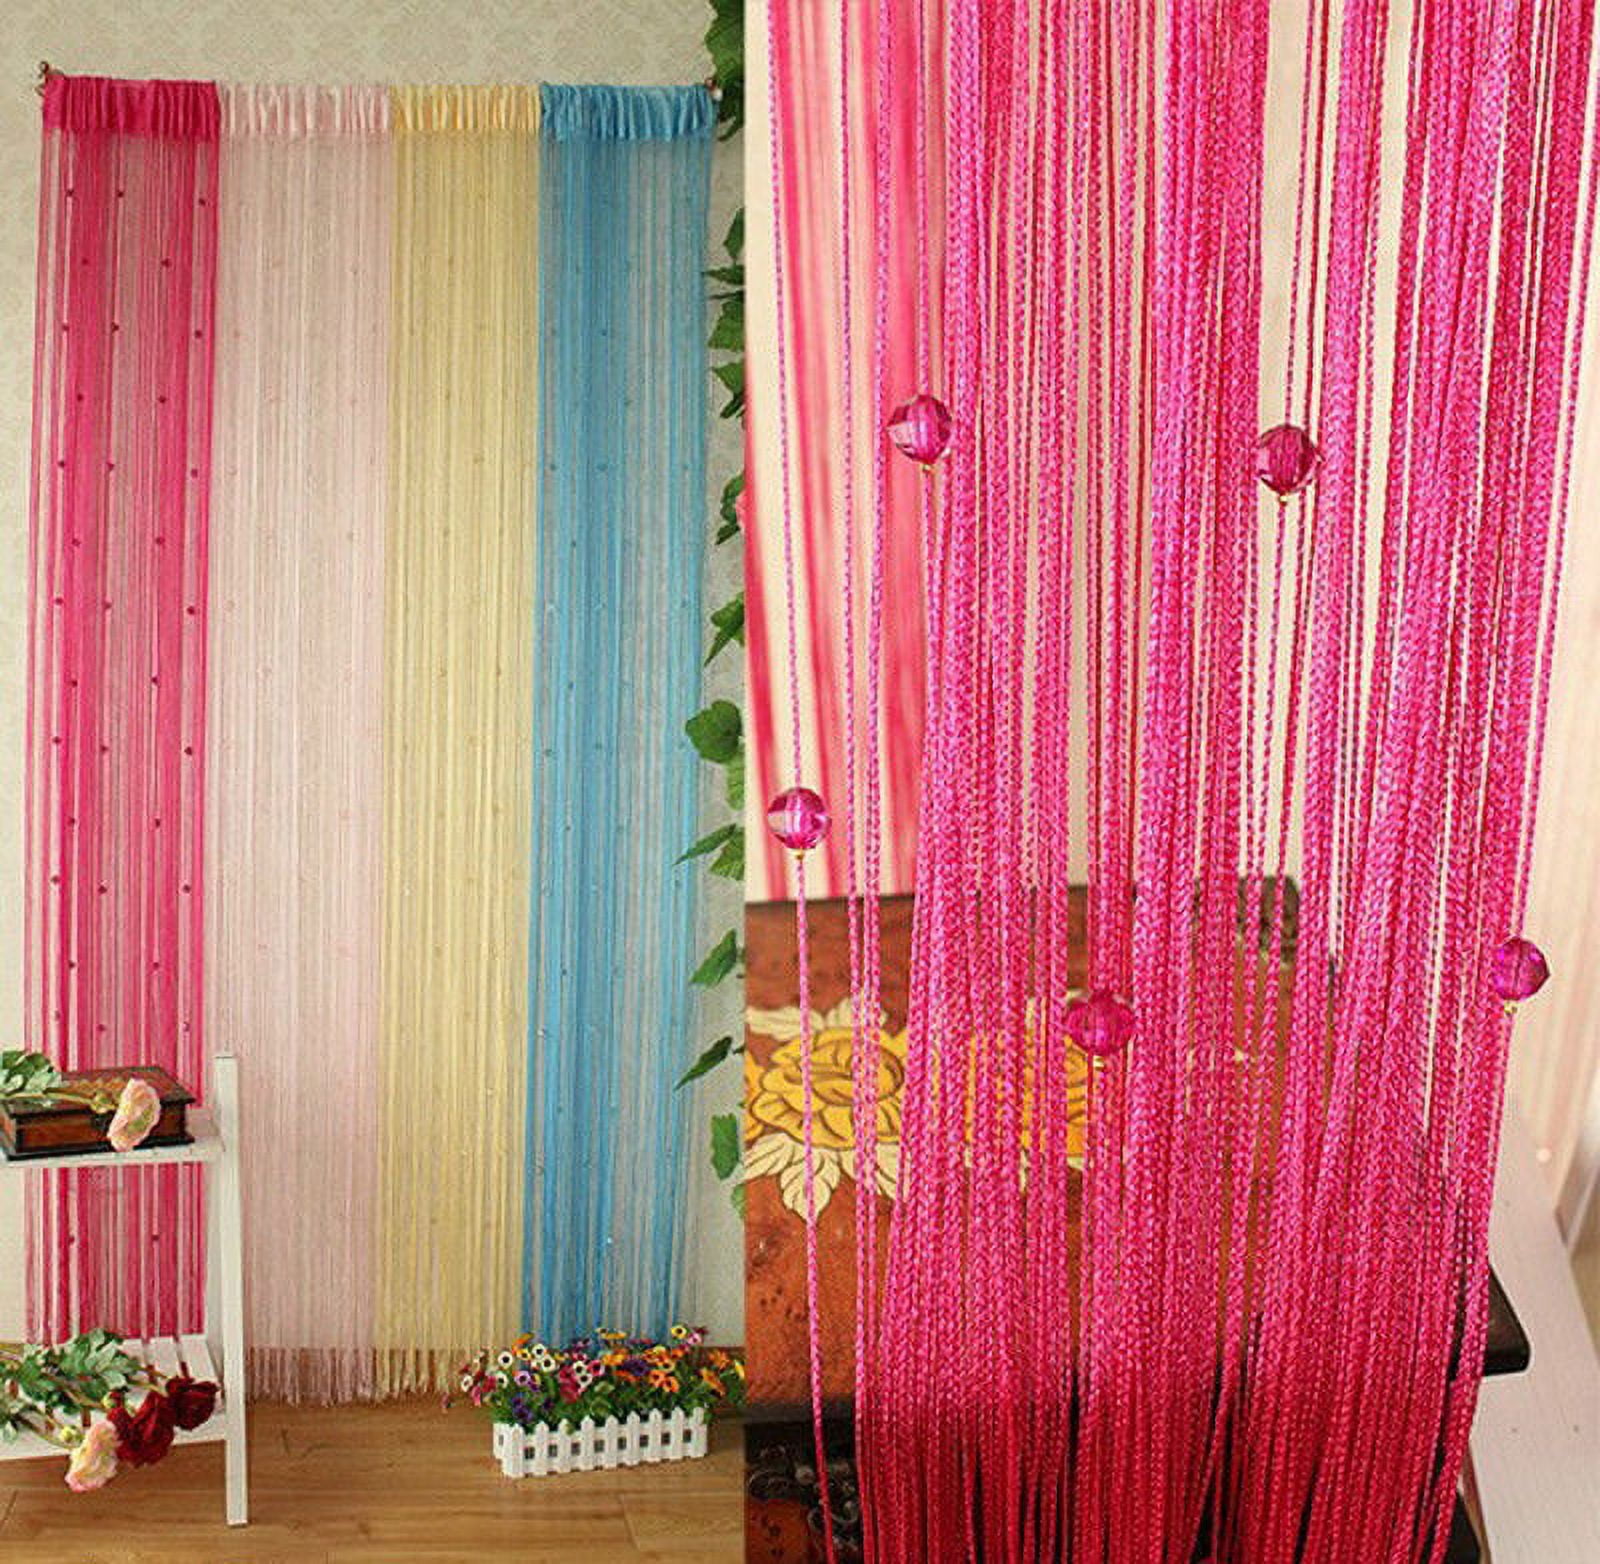 1m*2m Shiny Beautiful Screen Hangings Decoration Adornment Line Curtain  Home Bedroom Door Curtain Dividers